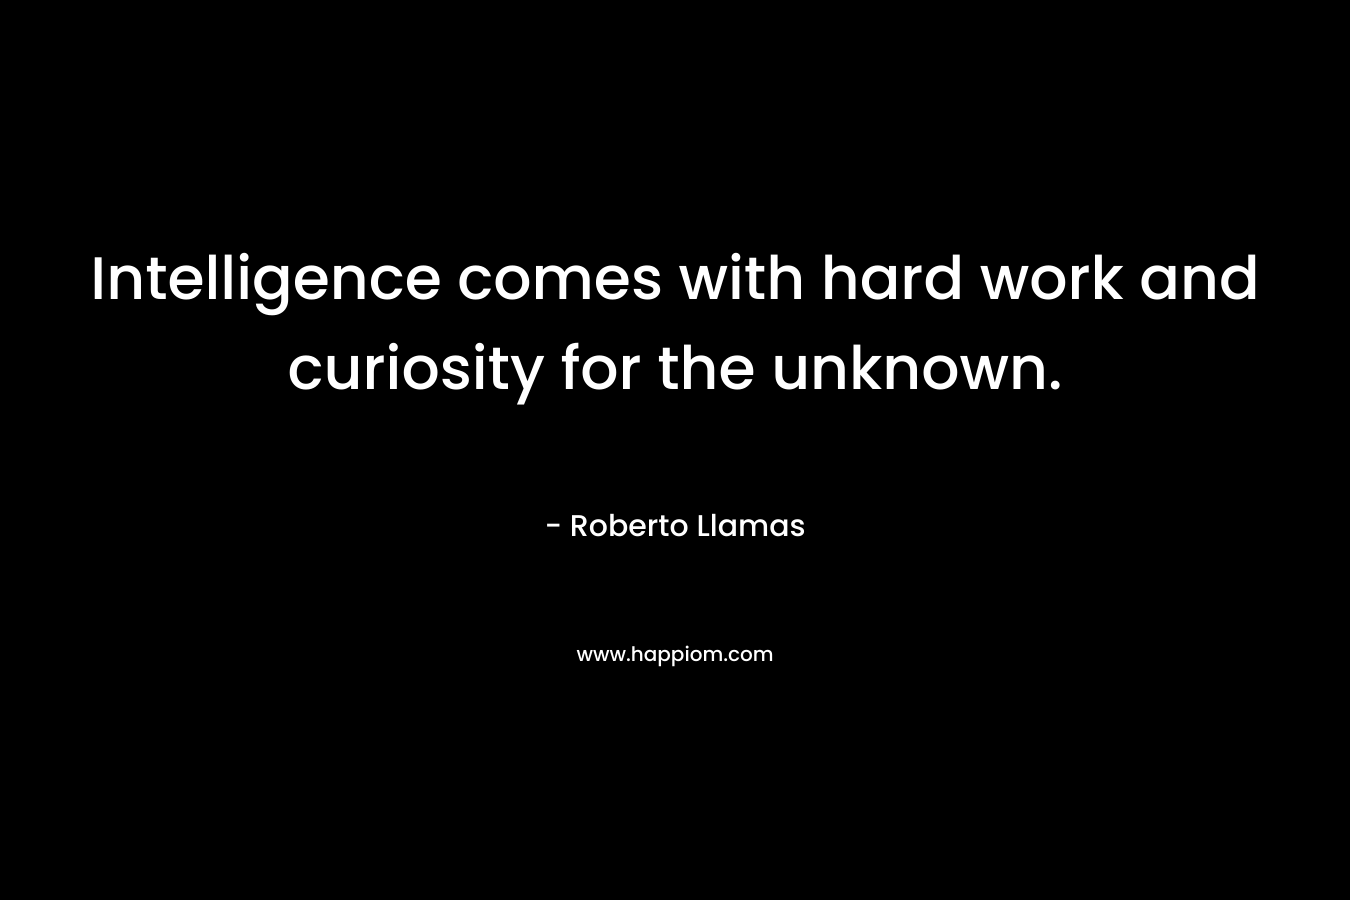 Intelligence comes with hard work and curiosity for the unknown. – Roberto Llamas